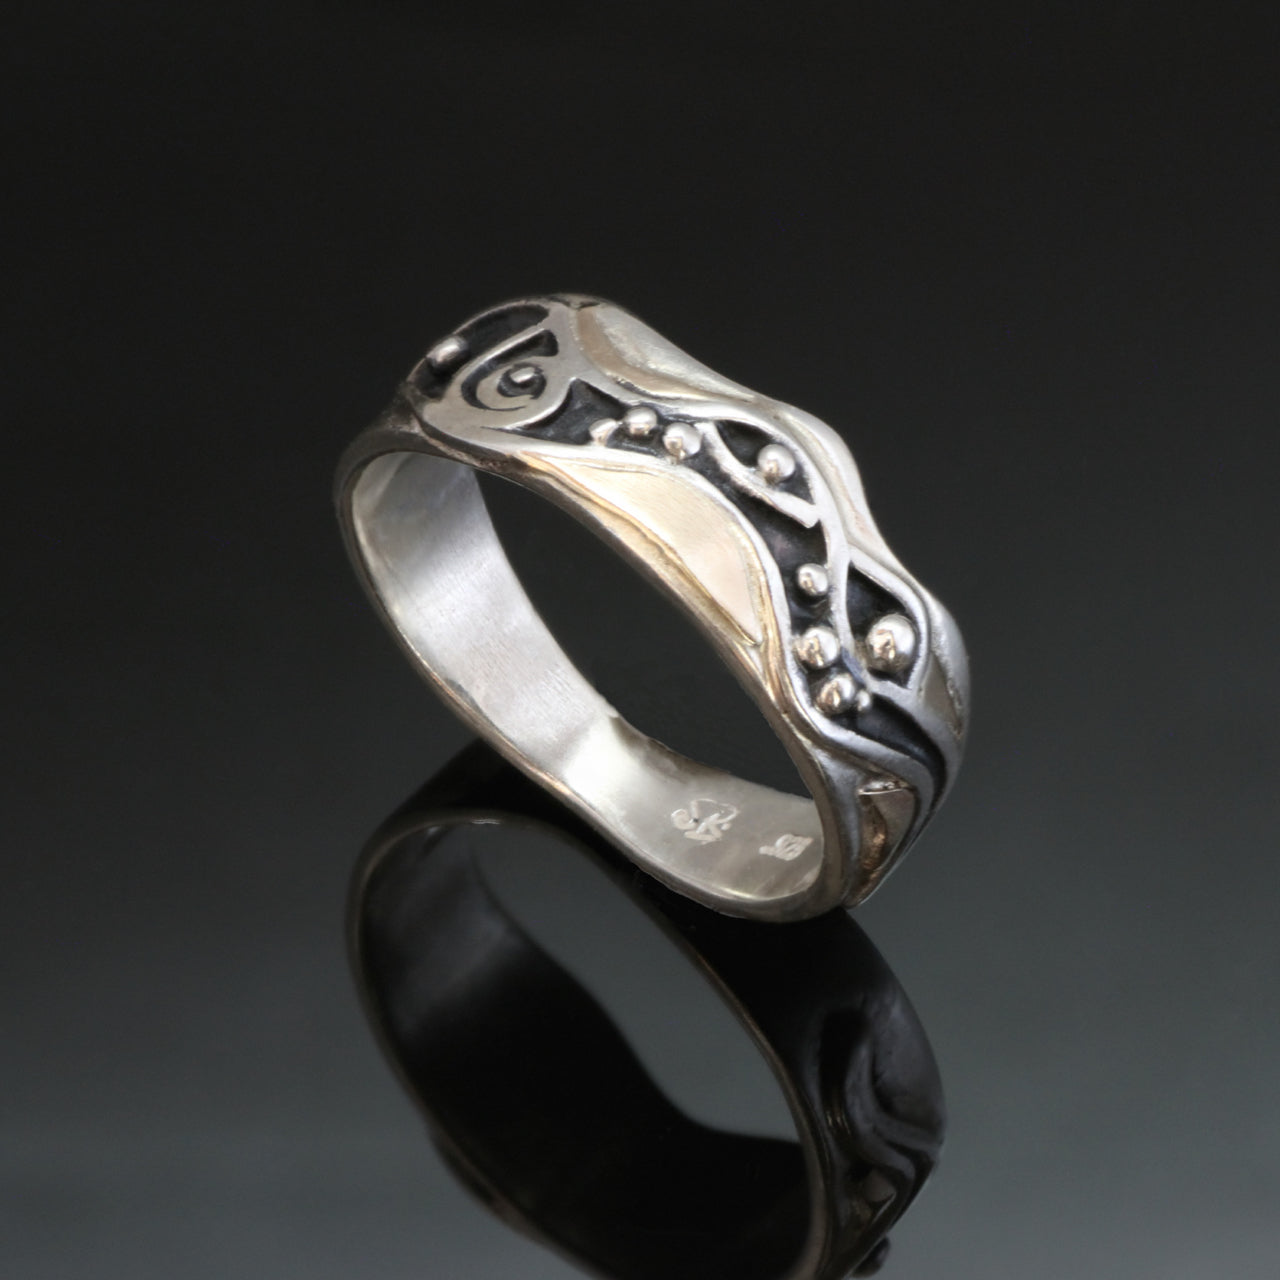 Silver ring with uneven edges, waves, spiral and dots showing a lively water scene. The oxidized pattern has gold accents around it.